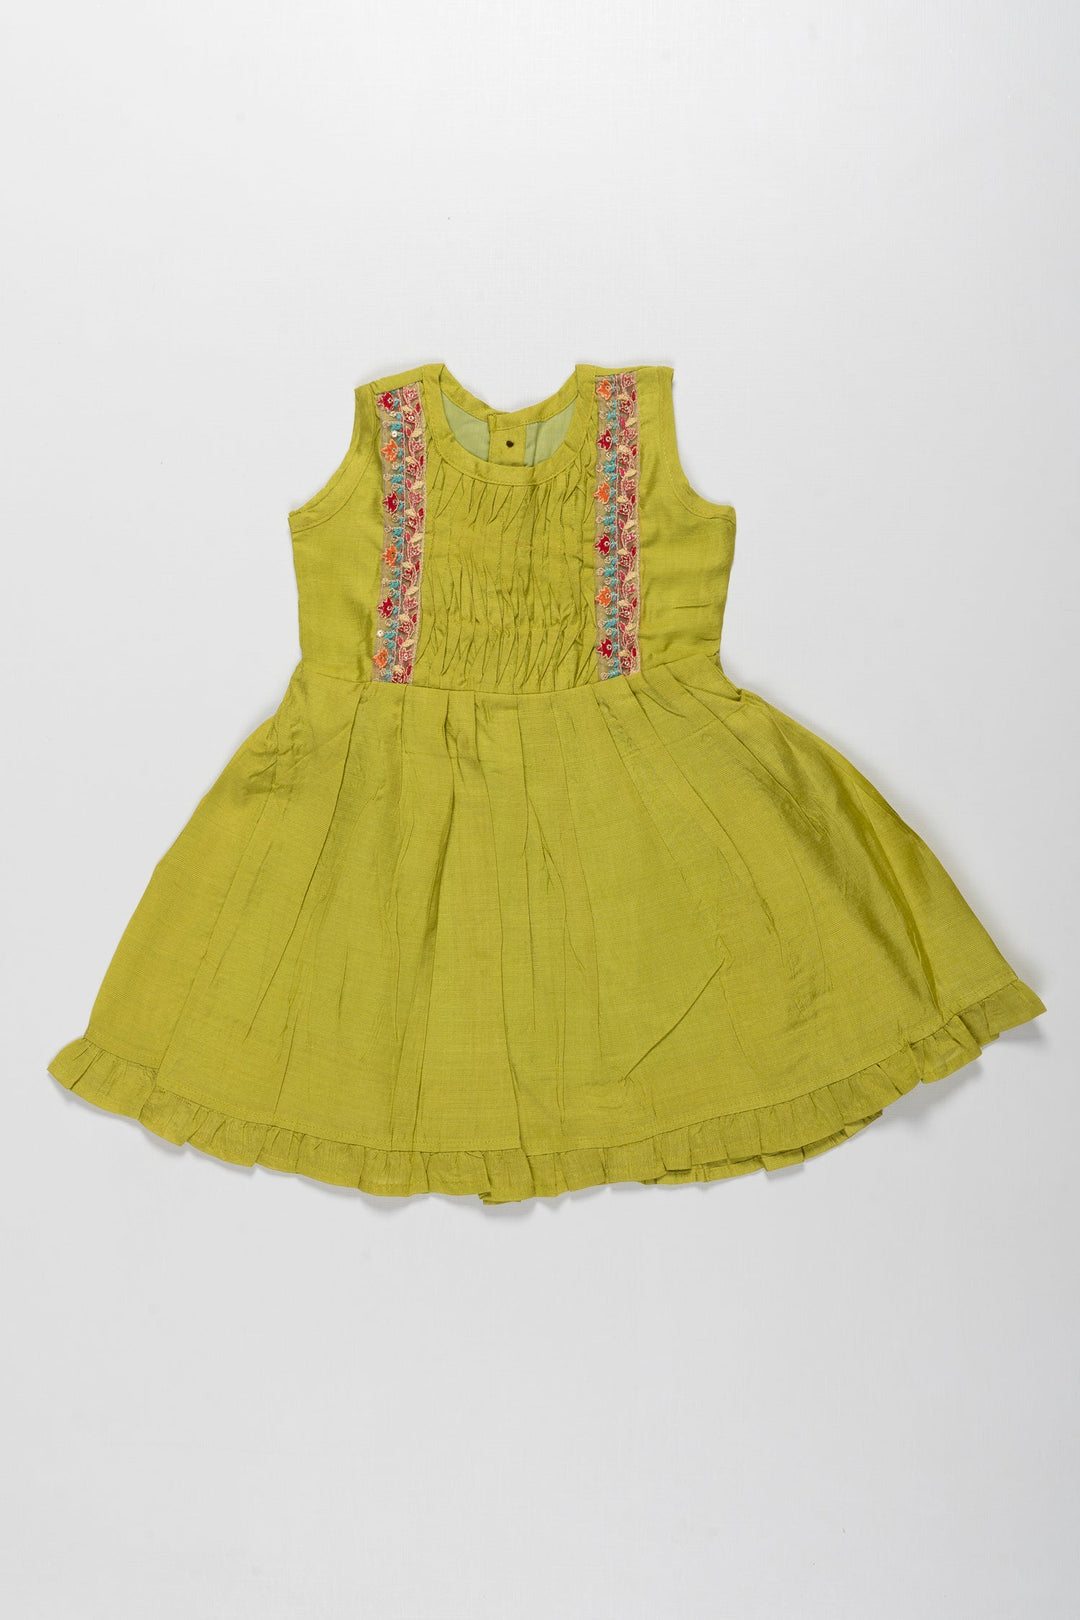 The Nesavu Girls Cotton Frock Girls Vibrant Green Cotton Frock with Floral Embroidery - Casual Elegance Redefined Nesavu 16 (1Y) / Green / Cotton GFC1262A-16 Green Embroidered Cotton Dress for Girls | Perfect for Summer Fun | The Nesavu